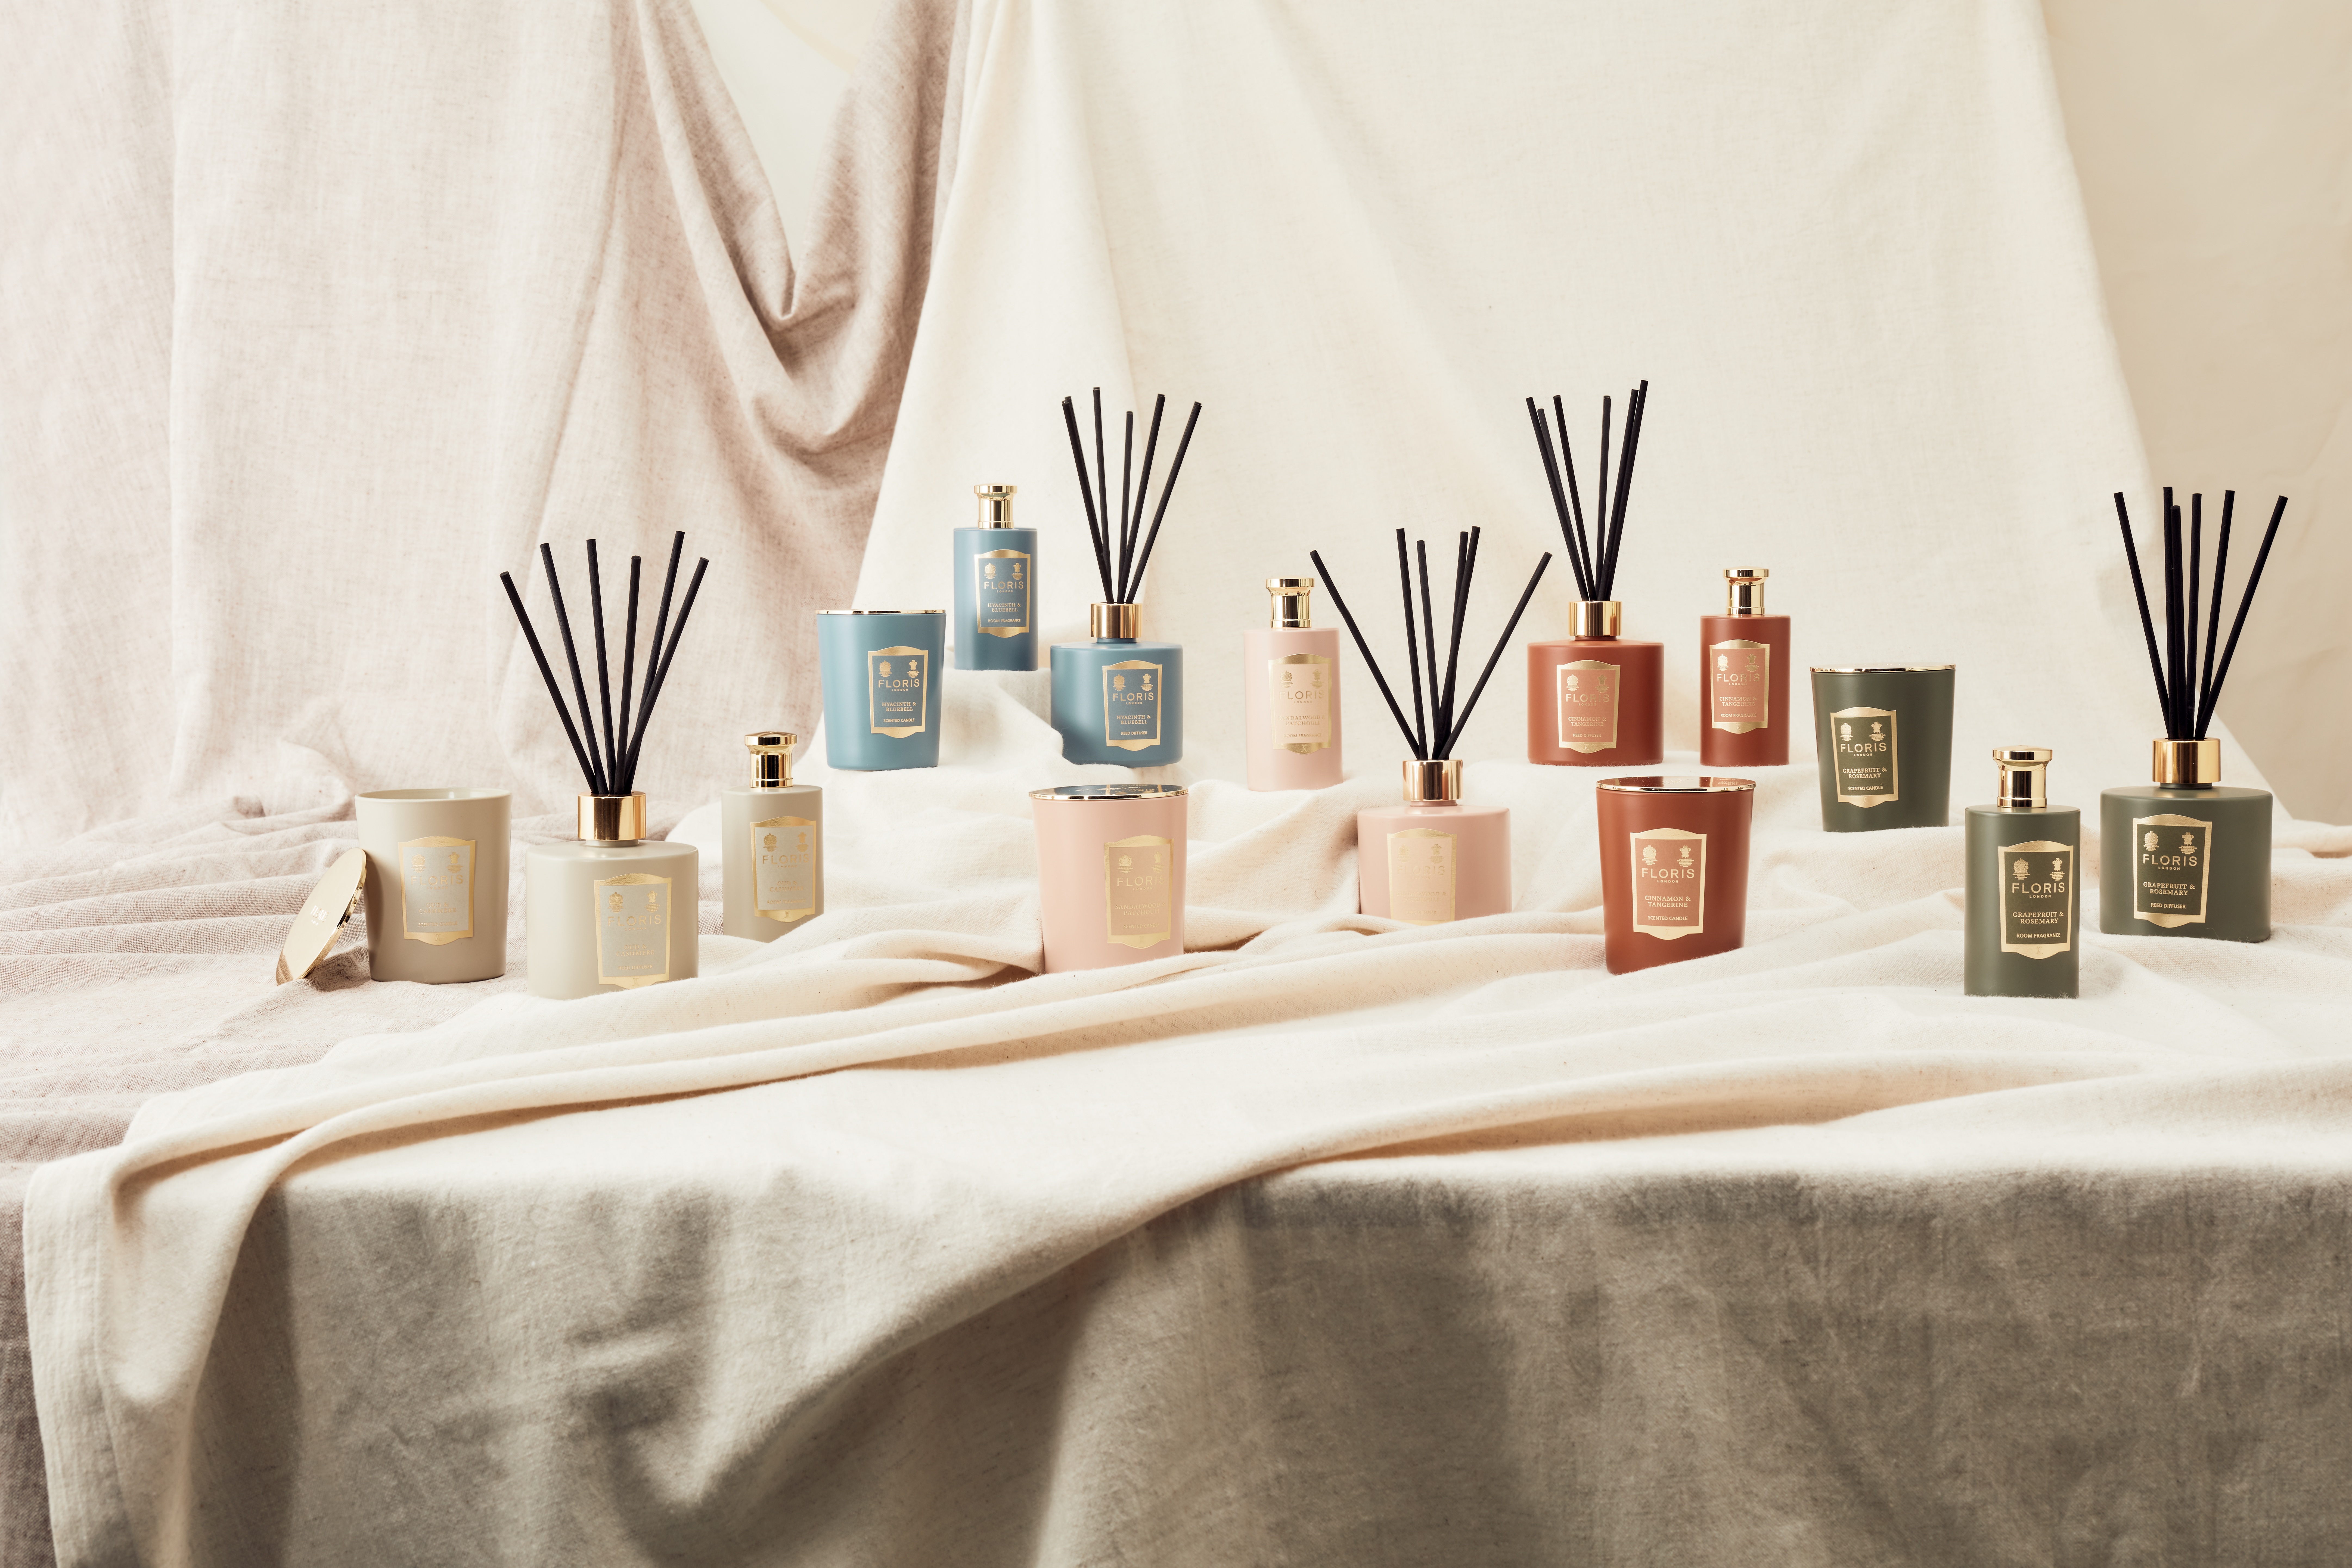 Floris home scented reed diffuser collection